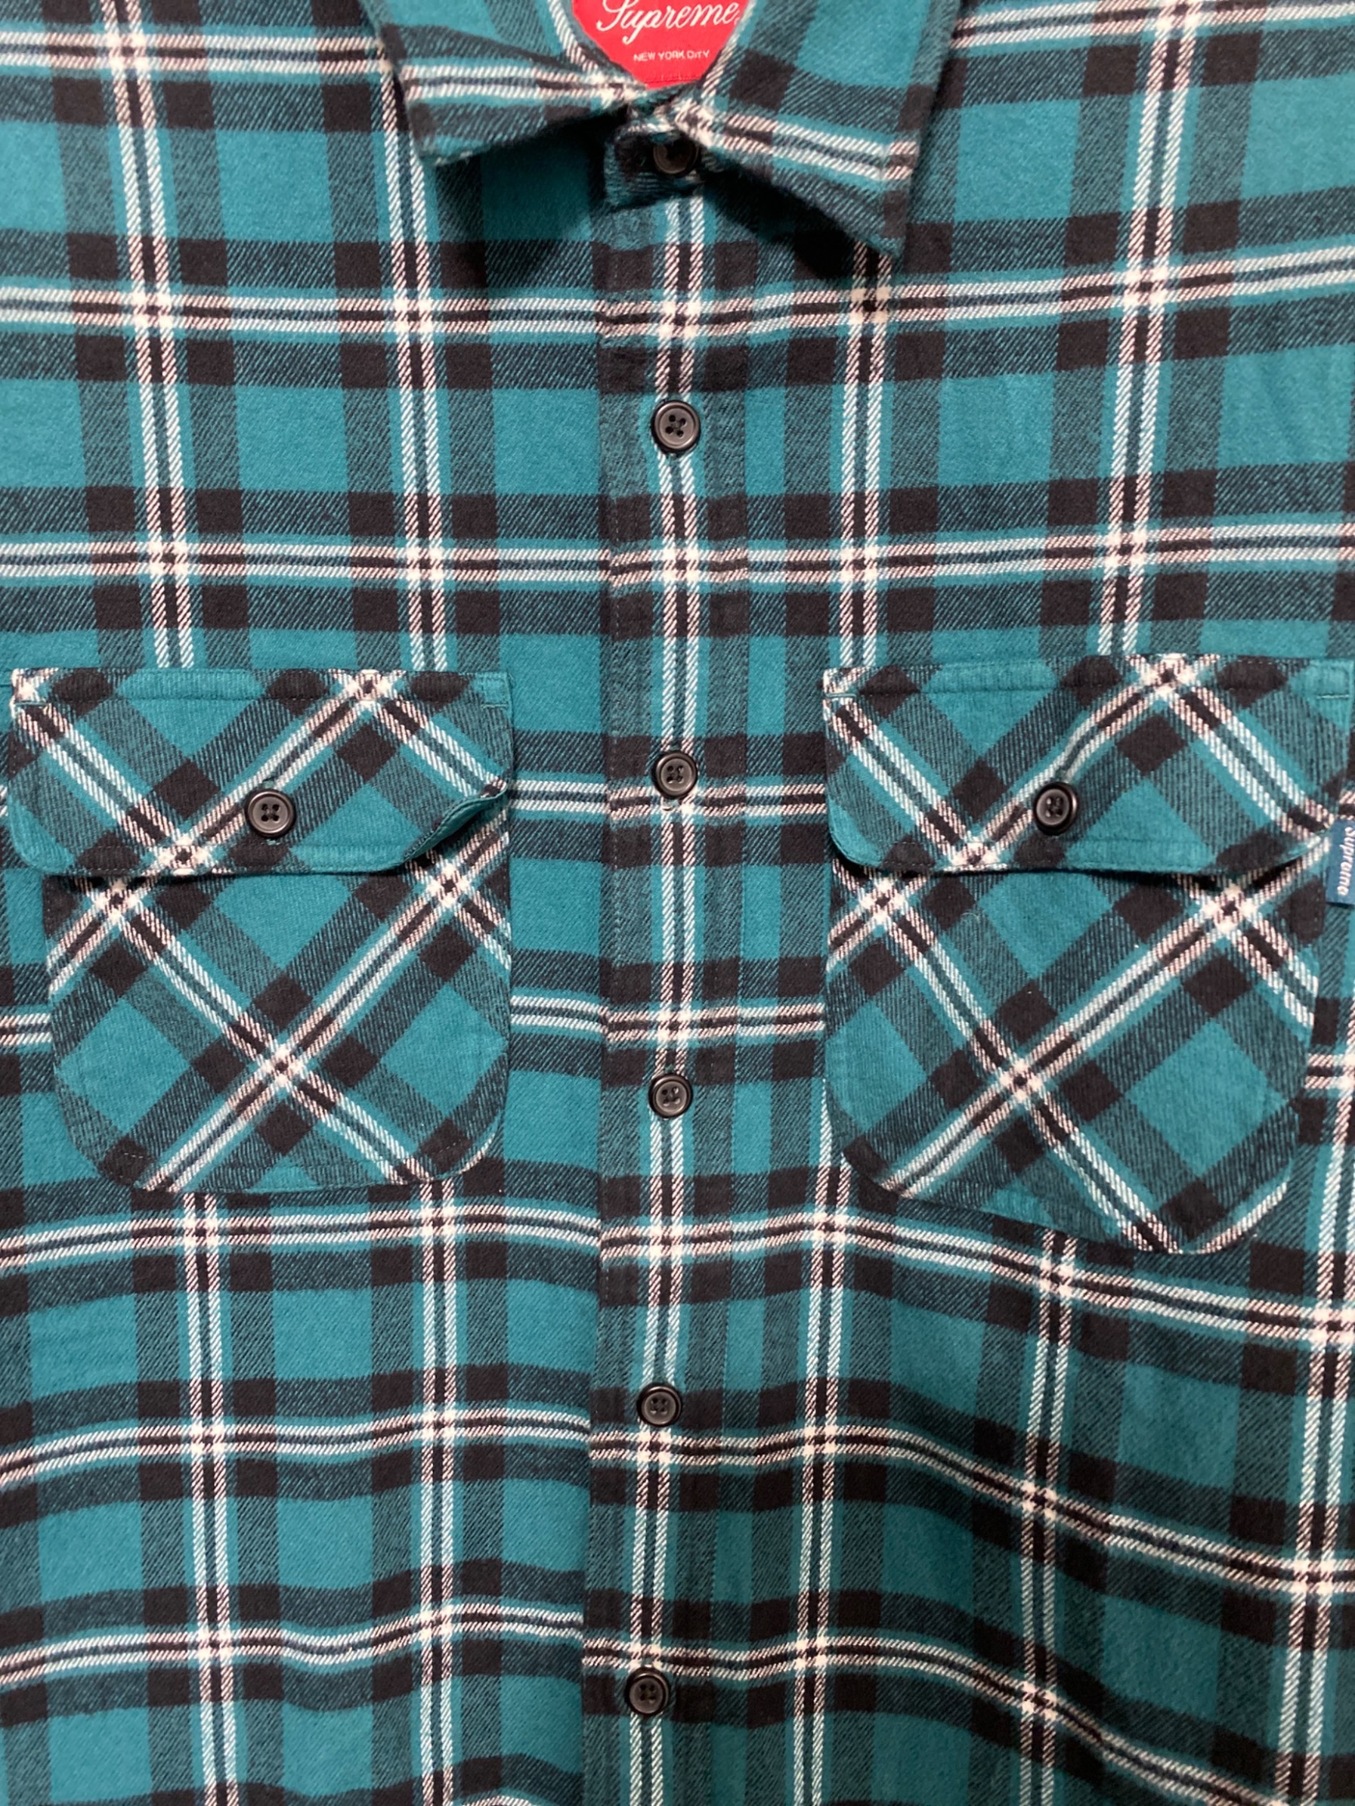 Arc Logo Quilted Flannel Shirt 緑 L